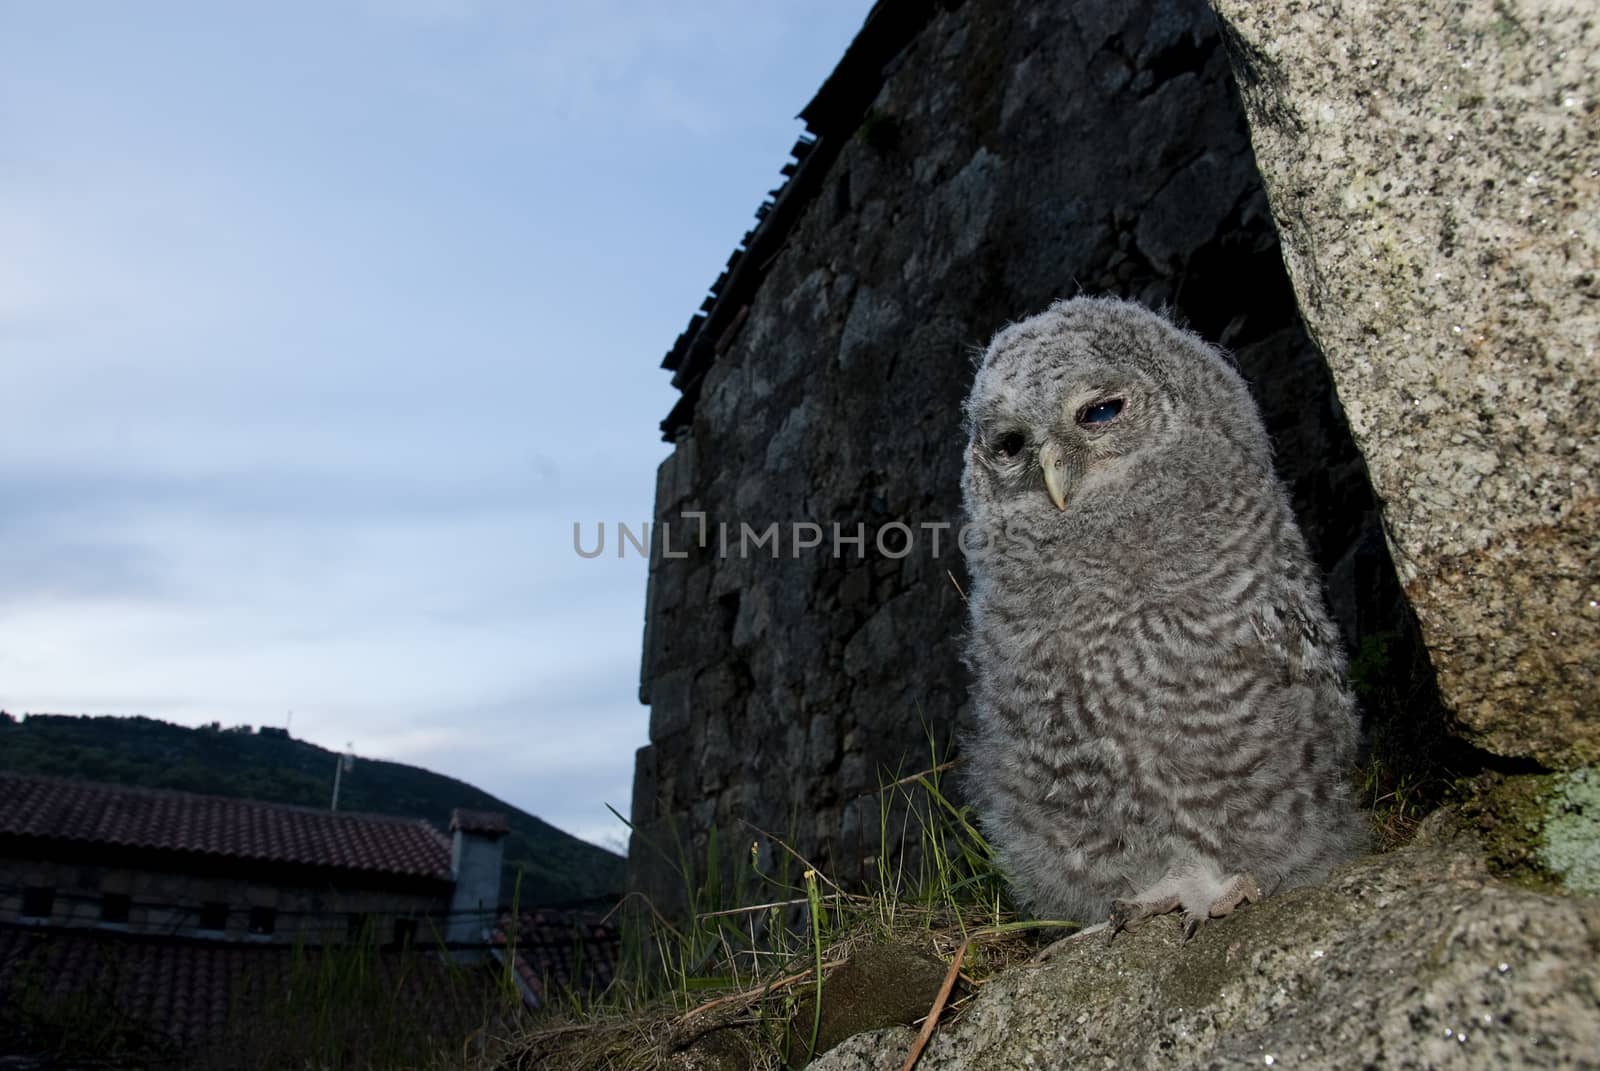 A young Tawny owl, waiting for his parents' food, rural setting